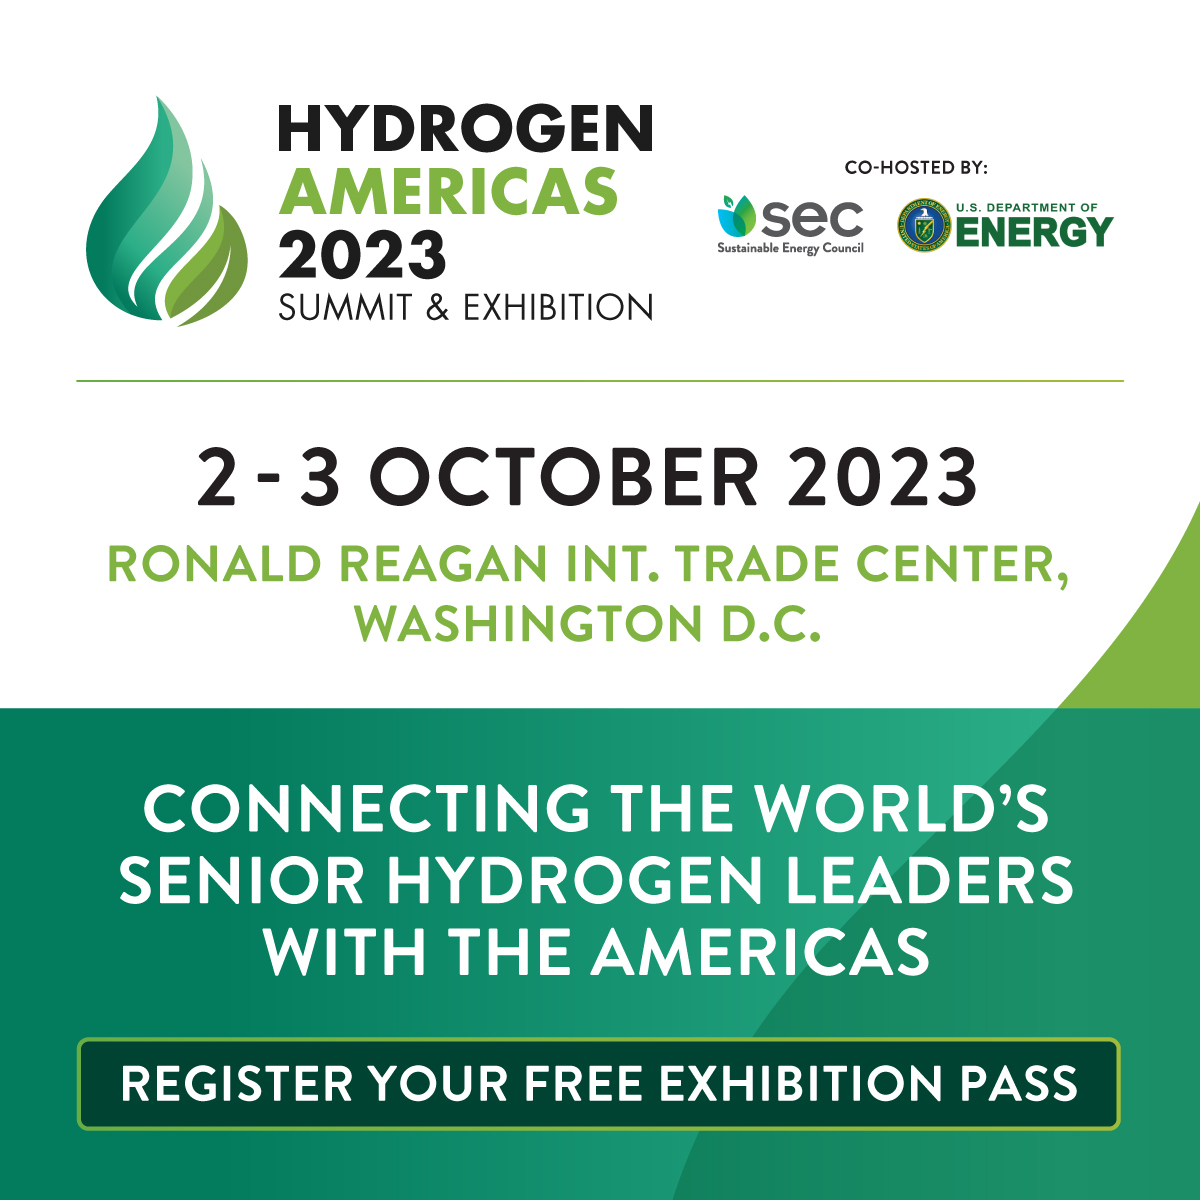 Hydrogen Americas 2023, connecting the world's senior hydrogen leaders with the Americas